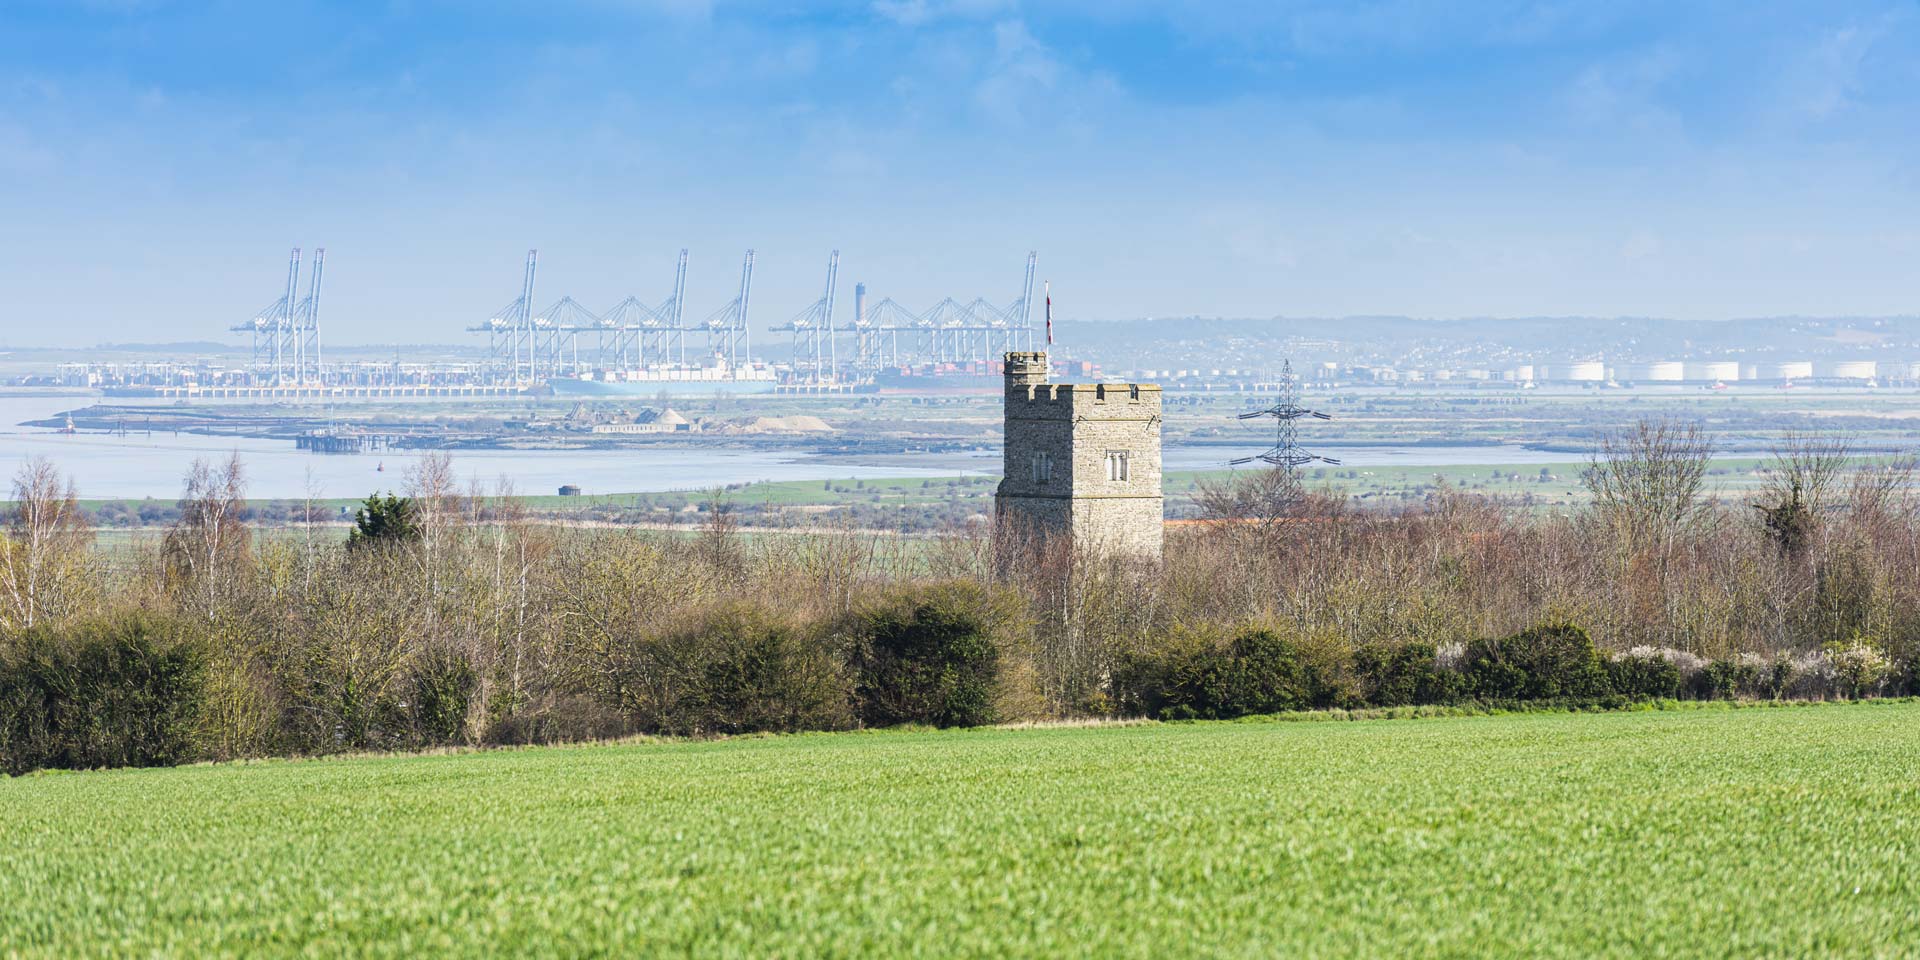 St Mary's Church in Chalk near Gravesend in Kent, England. Thames estuary and Essex can be seen in the distance